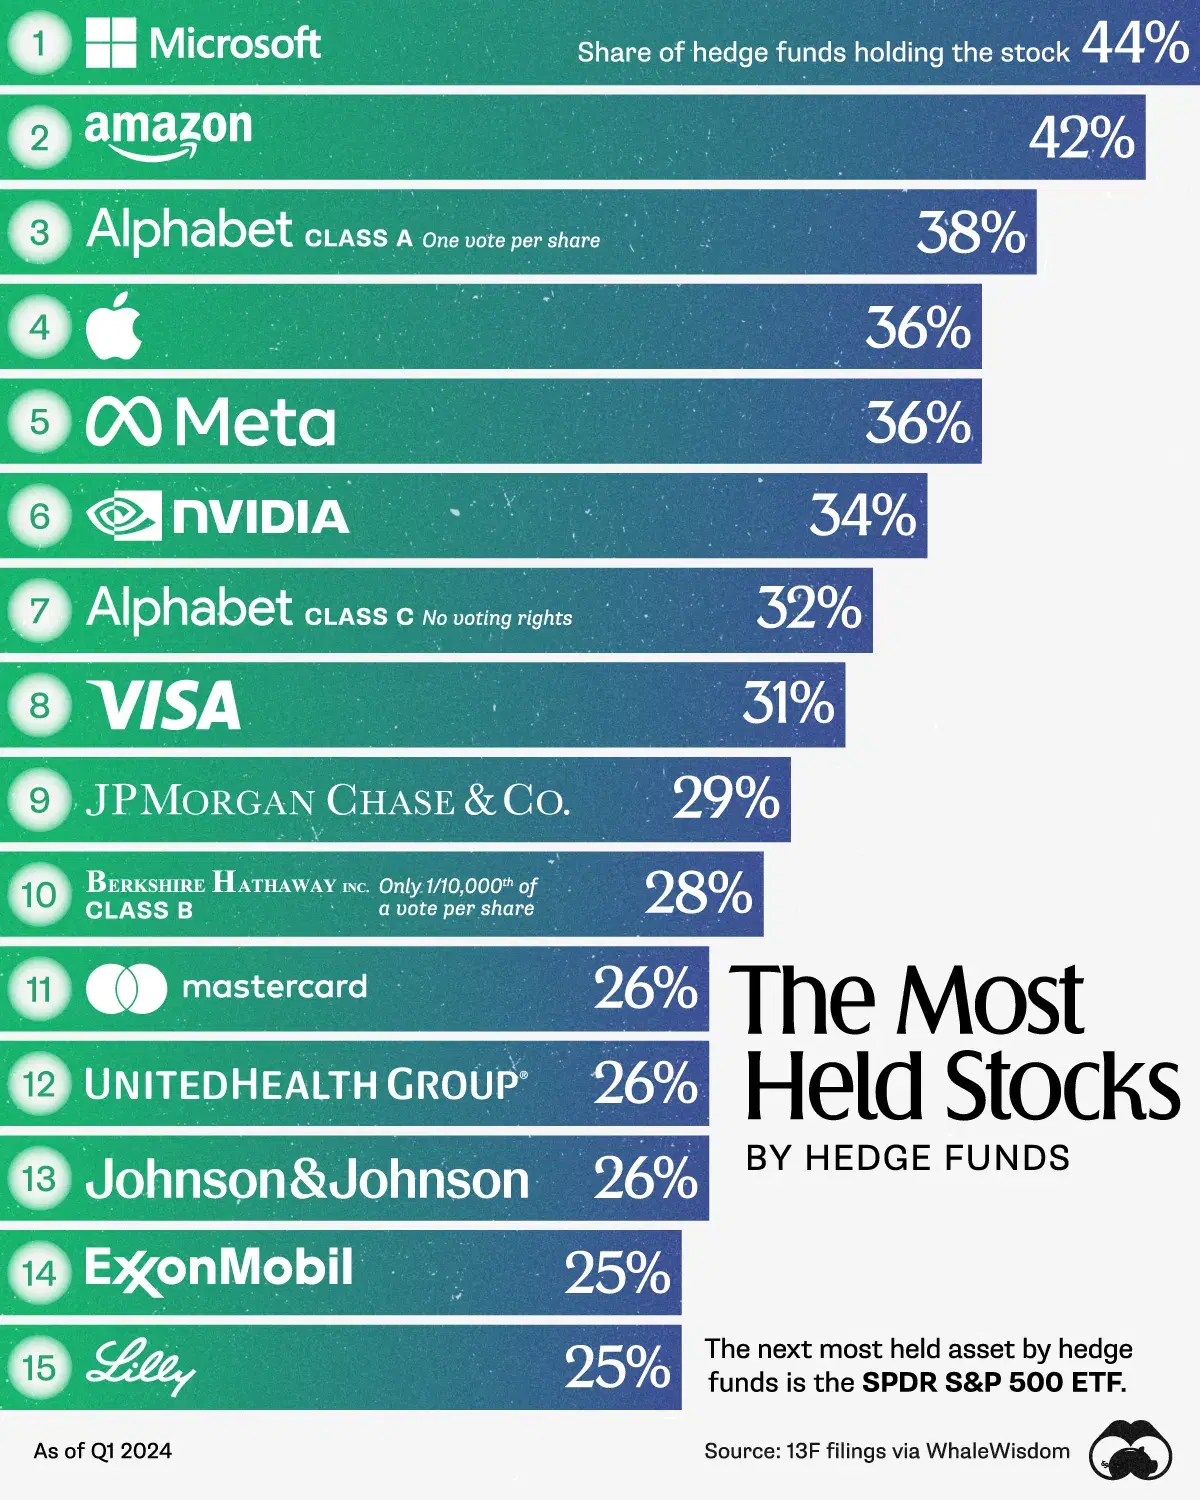 The Most Held Stocks by Hedge Funds